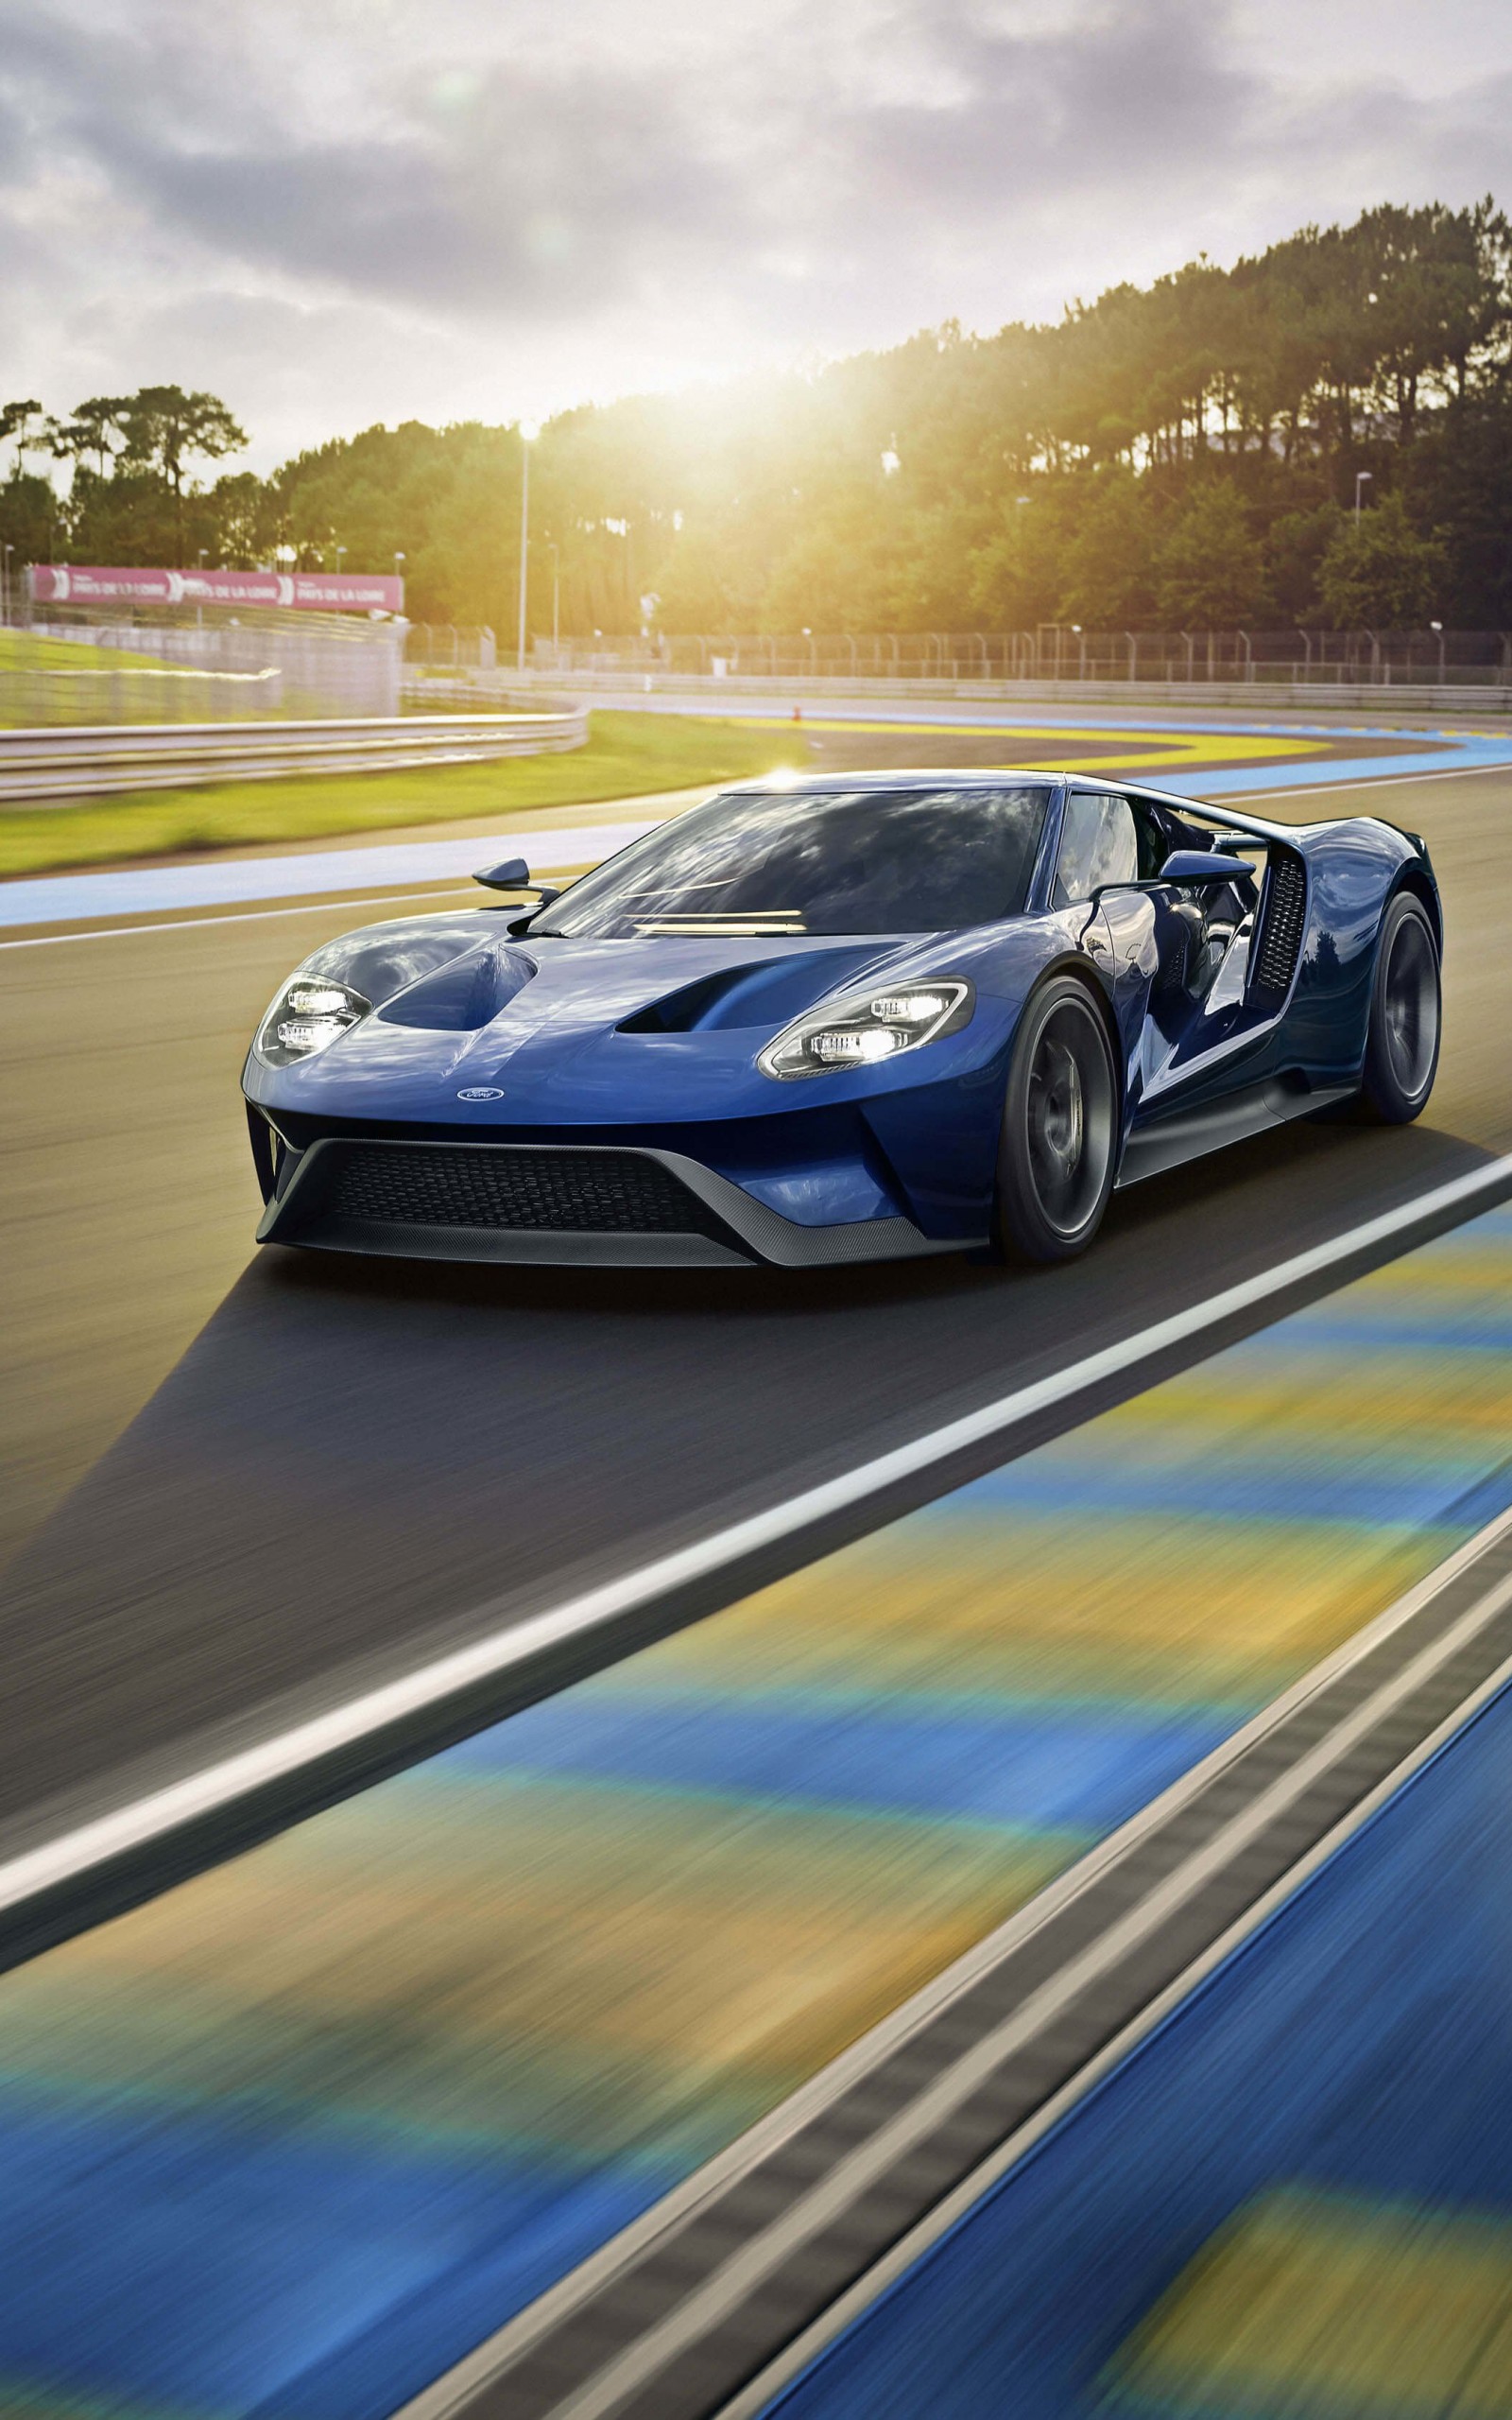 Ford GT Supercar Wallpaper for Amazon Kindle Fire HDX 8.9